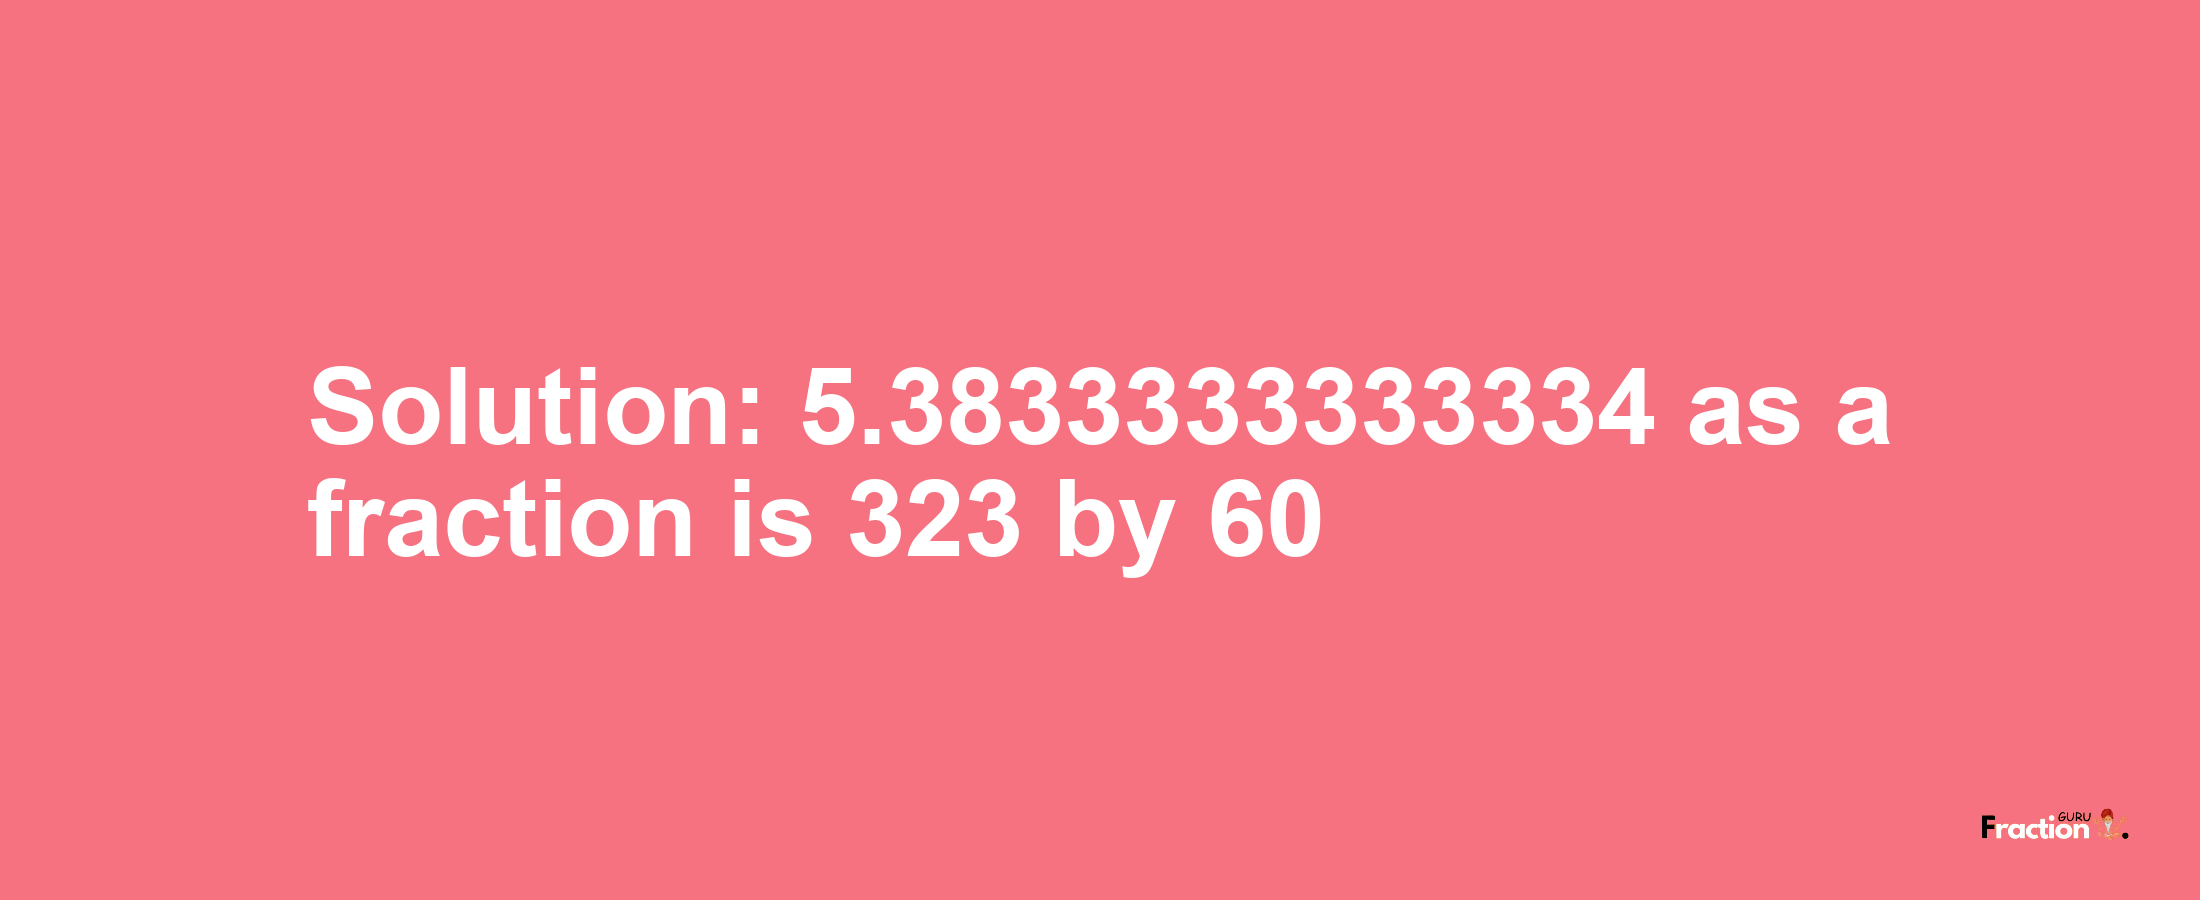 Solution:5.3833333333334 as a fraction is 323/60